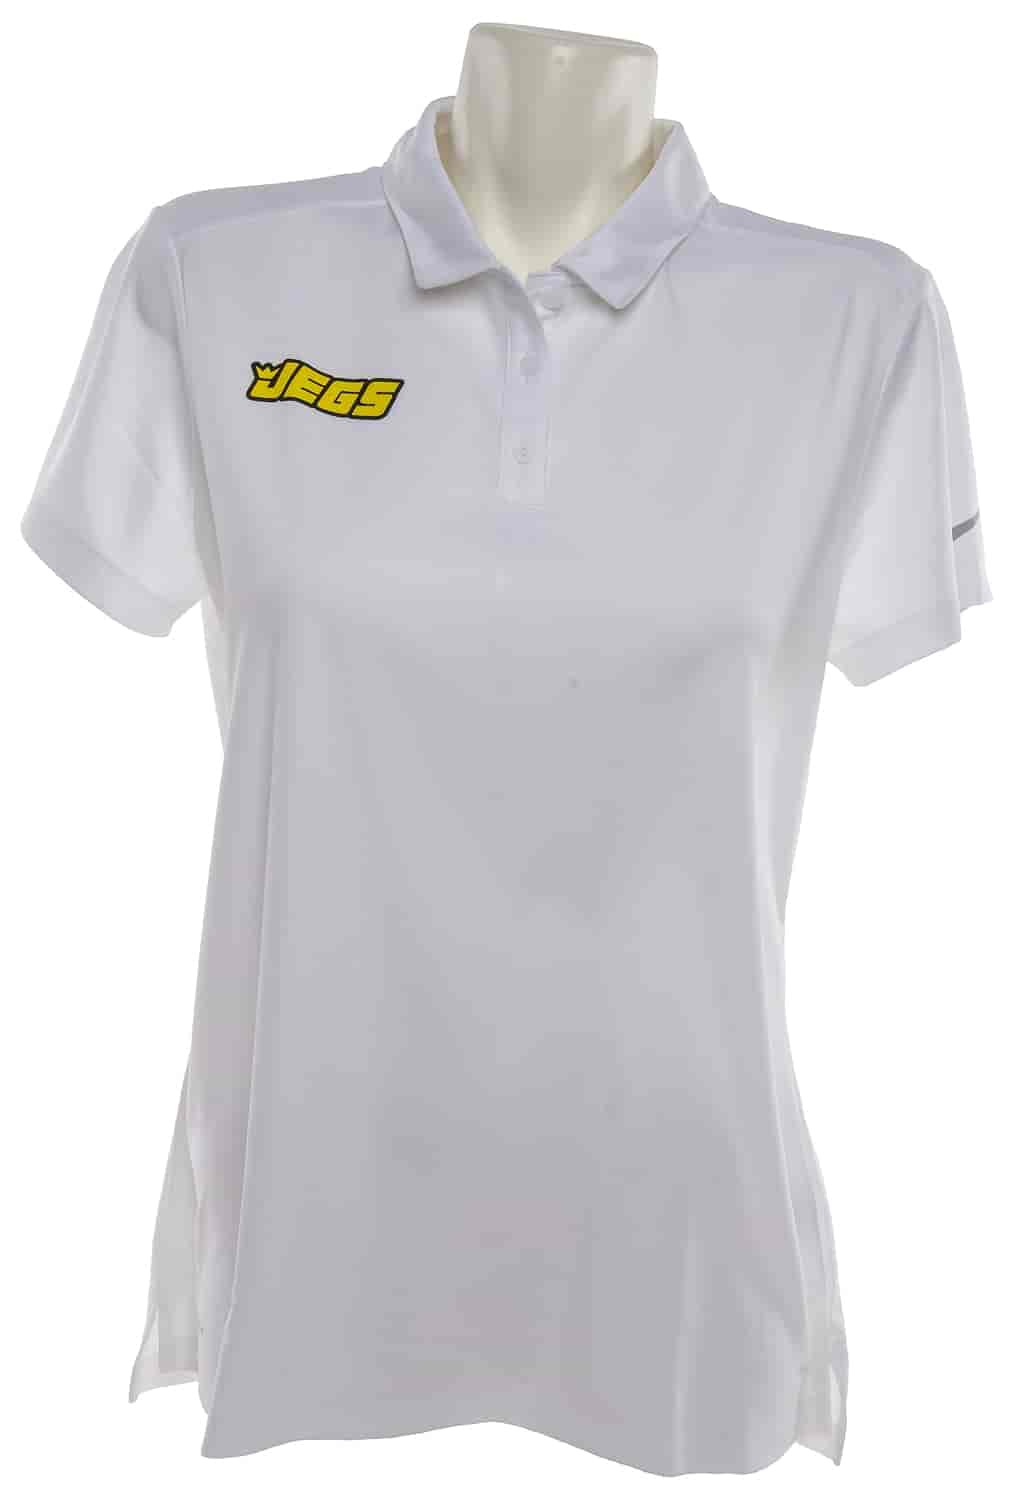 JEGS Nike Ladies Dri-Fit Polo Shirt | JEGS Apparel and Collectibles - JEGS  High Performance